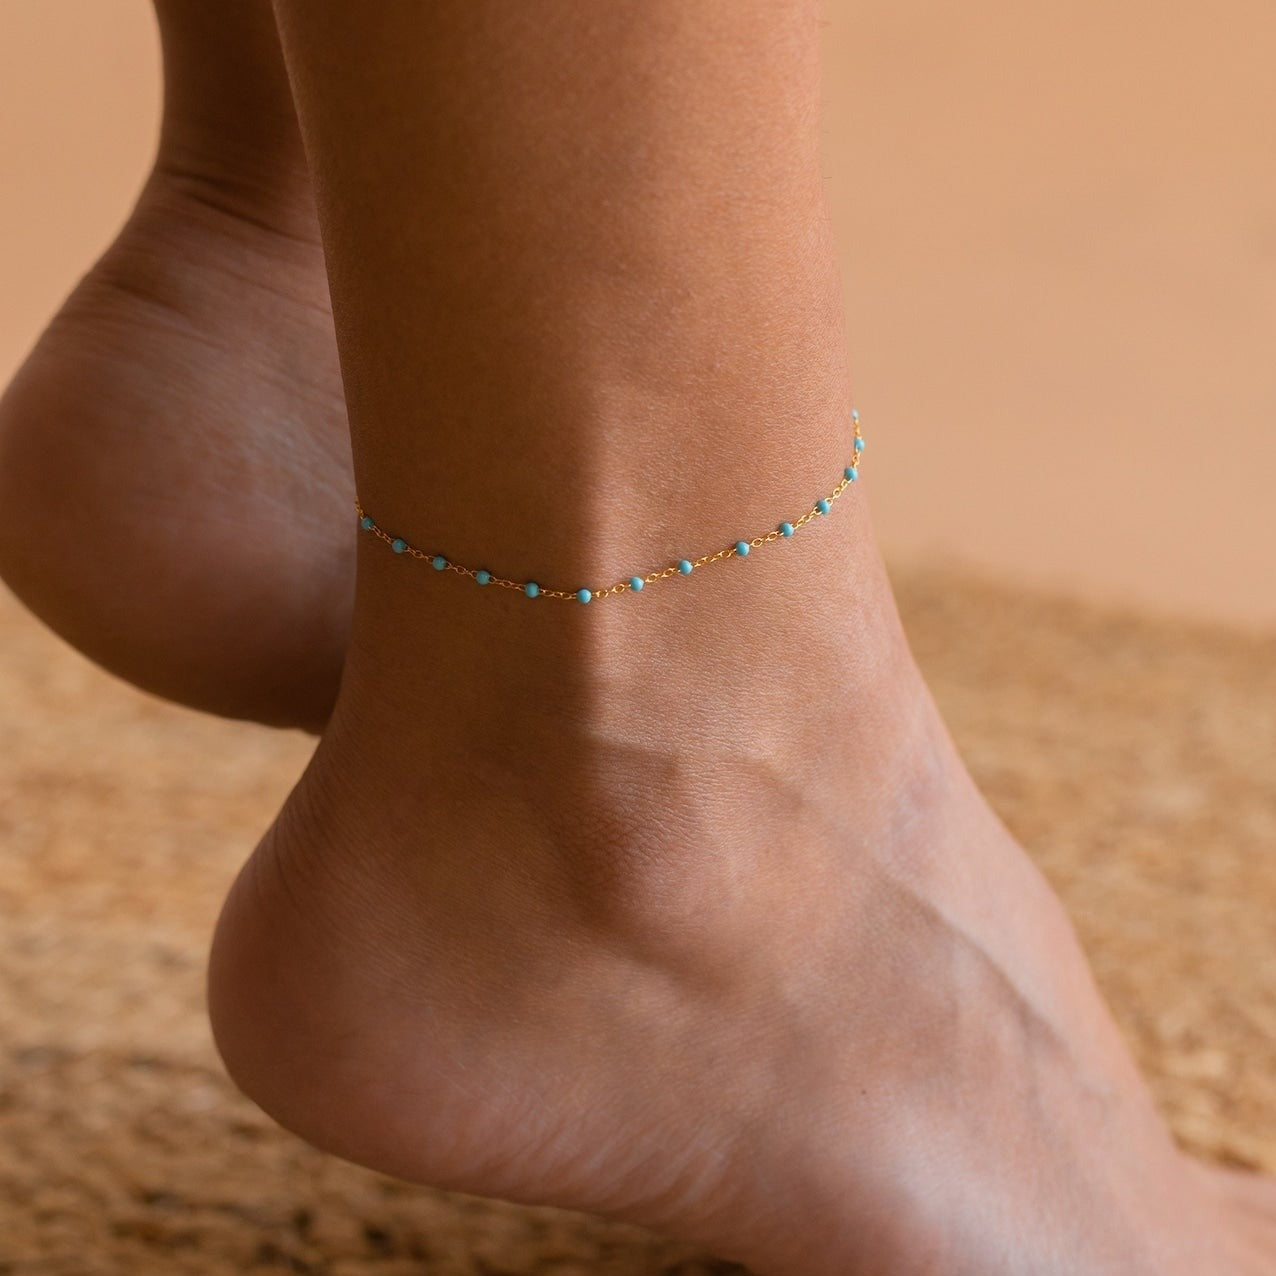 1 Pcs Crystal Barefoot Sandals Anklet Bracelet For Women Rhinestone Bridal  Toe Ankle Foot Chain Jewelry Beach Boho Jewelry - Anklets - AliExpress